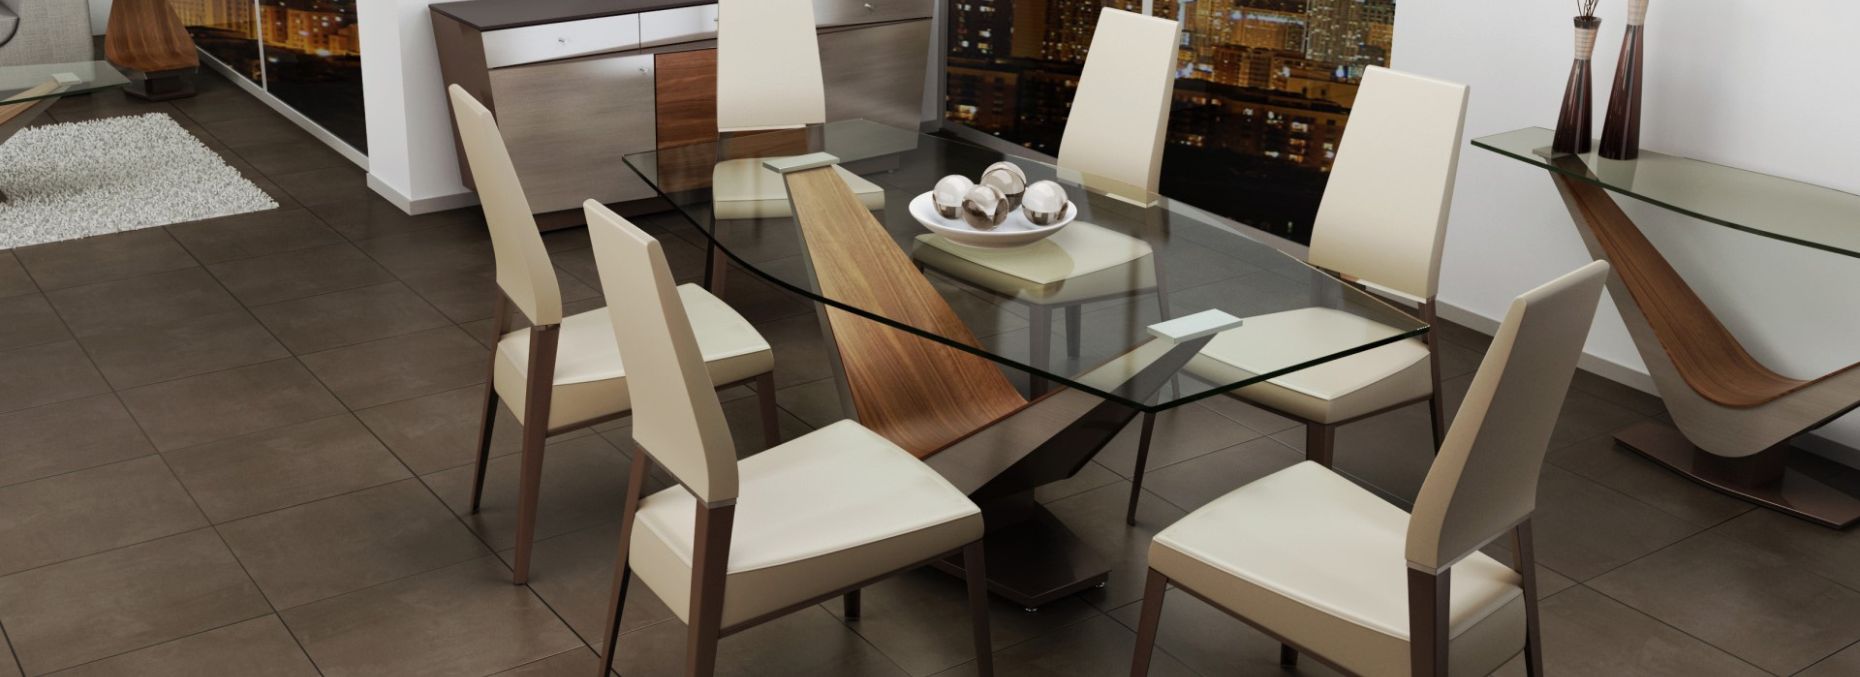 Glass dining table with chairs